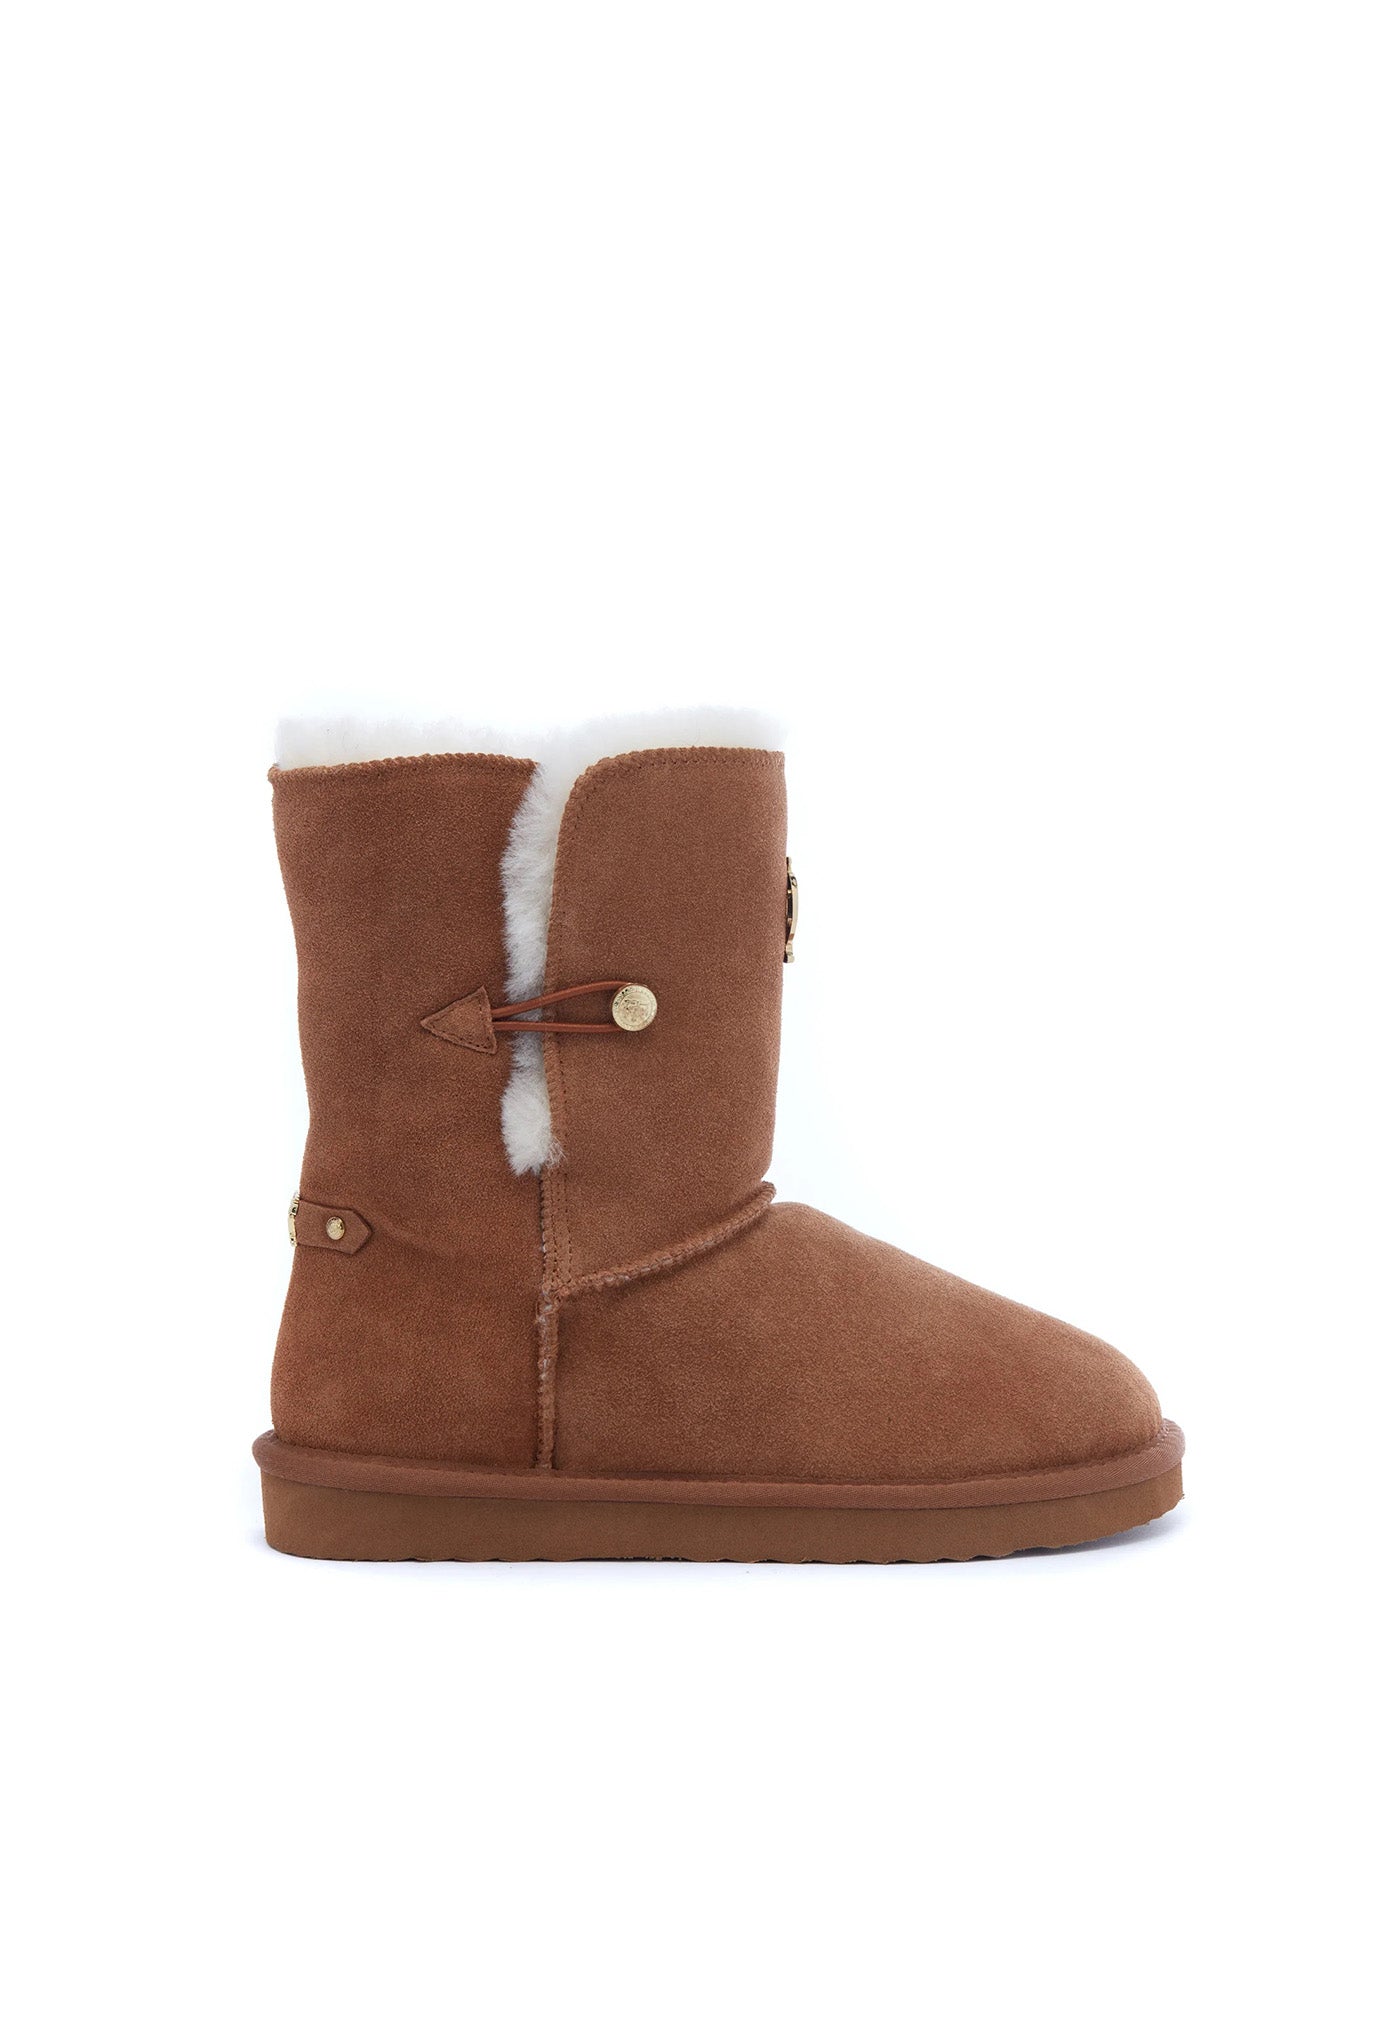 HC Shearling Boot - Tan sold by Angel Divine